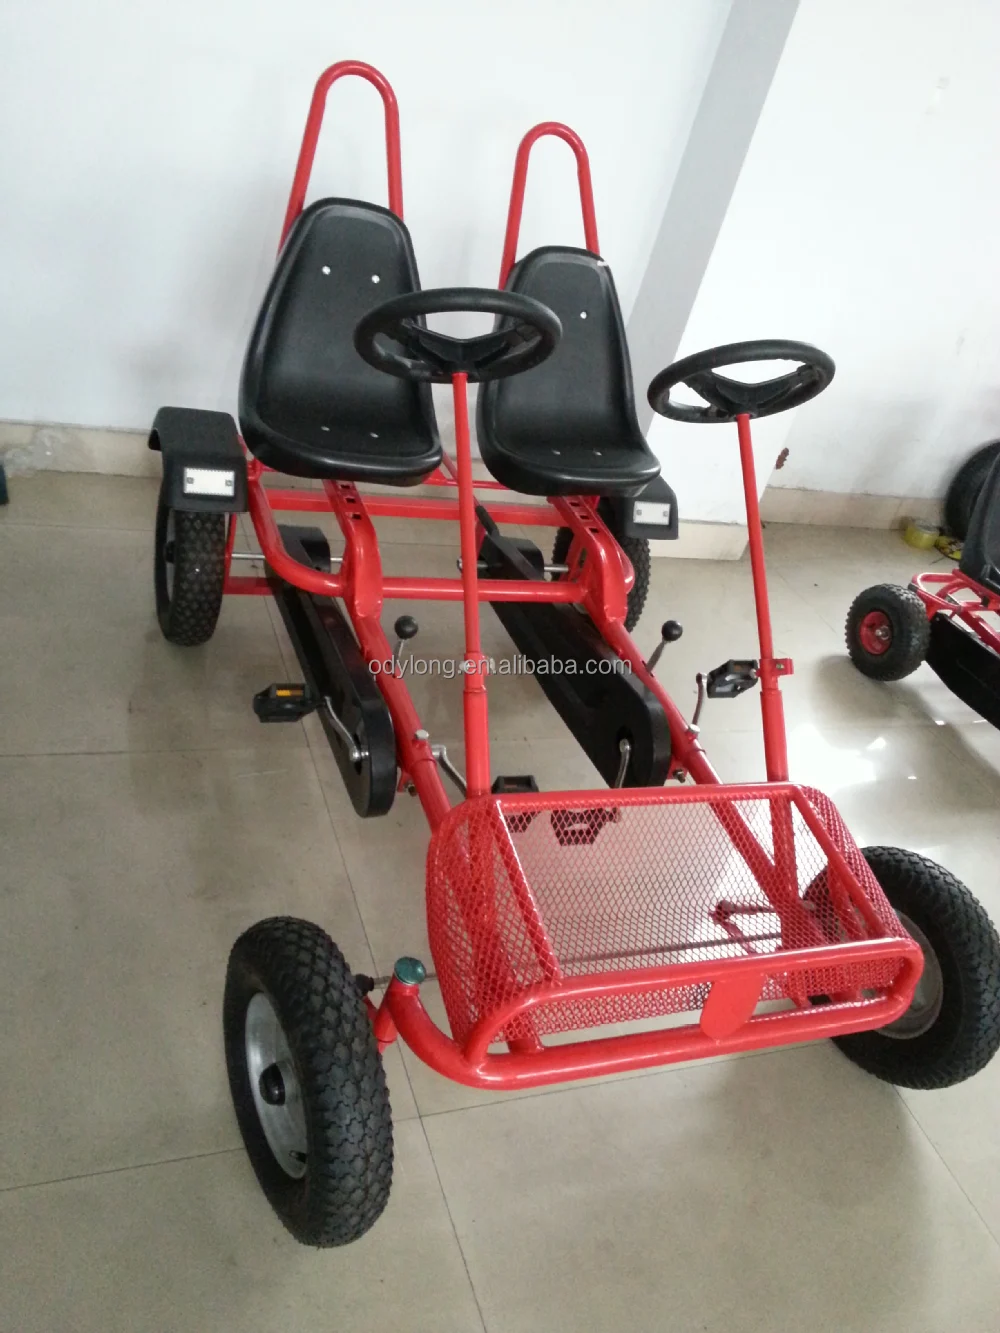 Cheap Two Seat Adult Pedal Go Kart F2150 Buy Adult Pedal Go Kart 